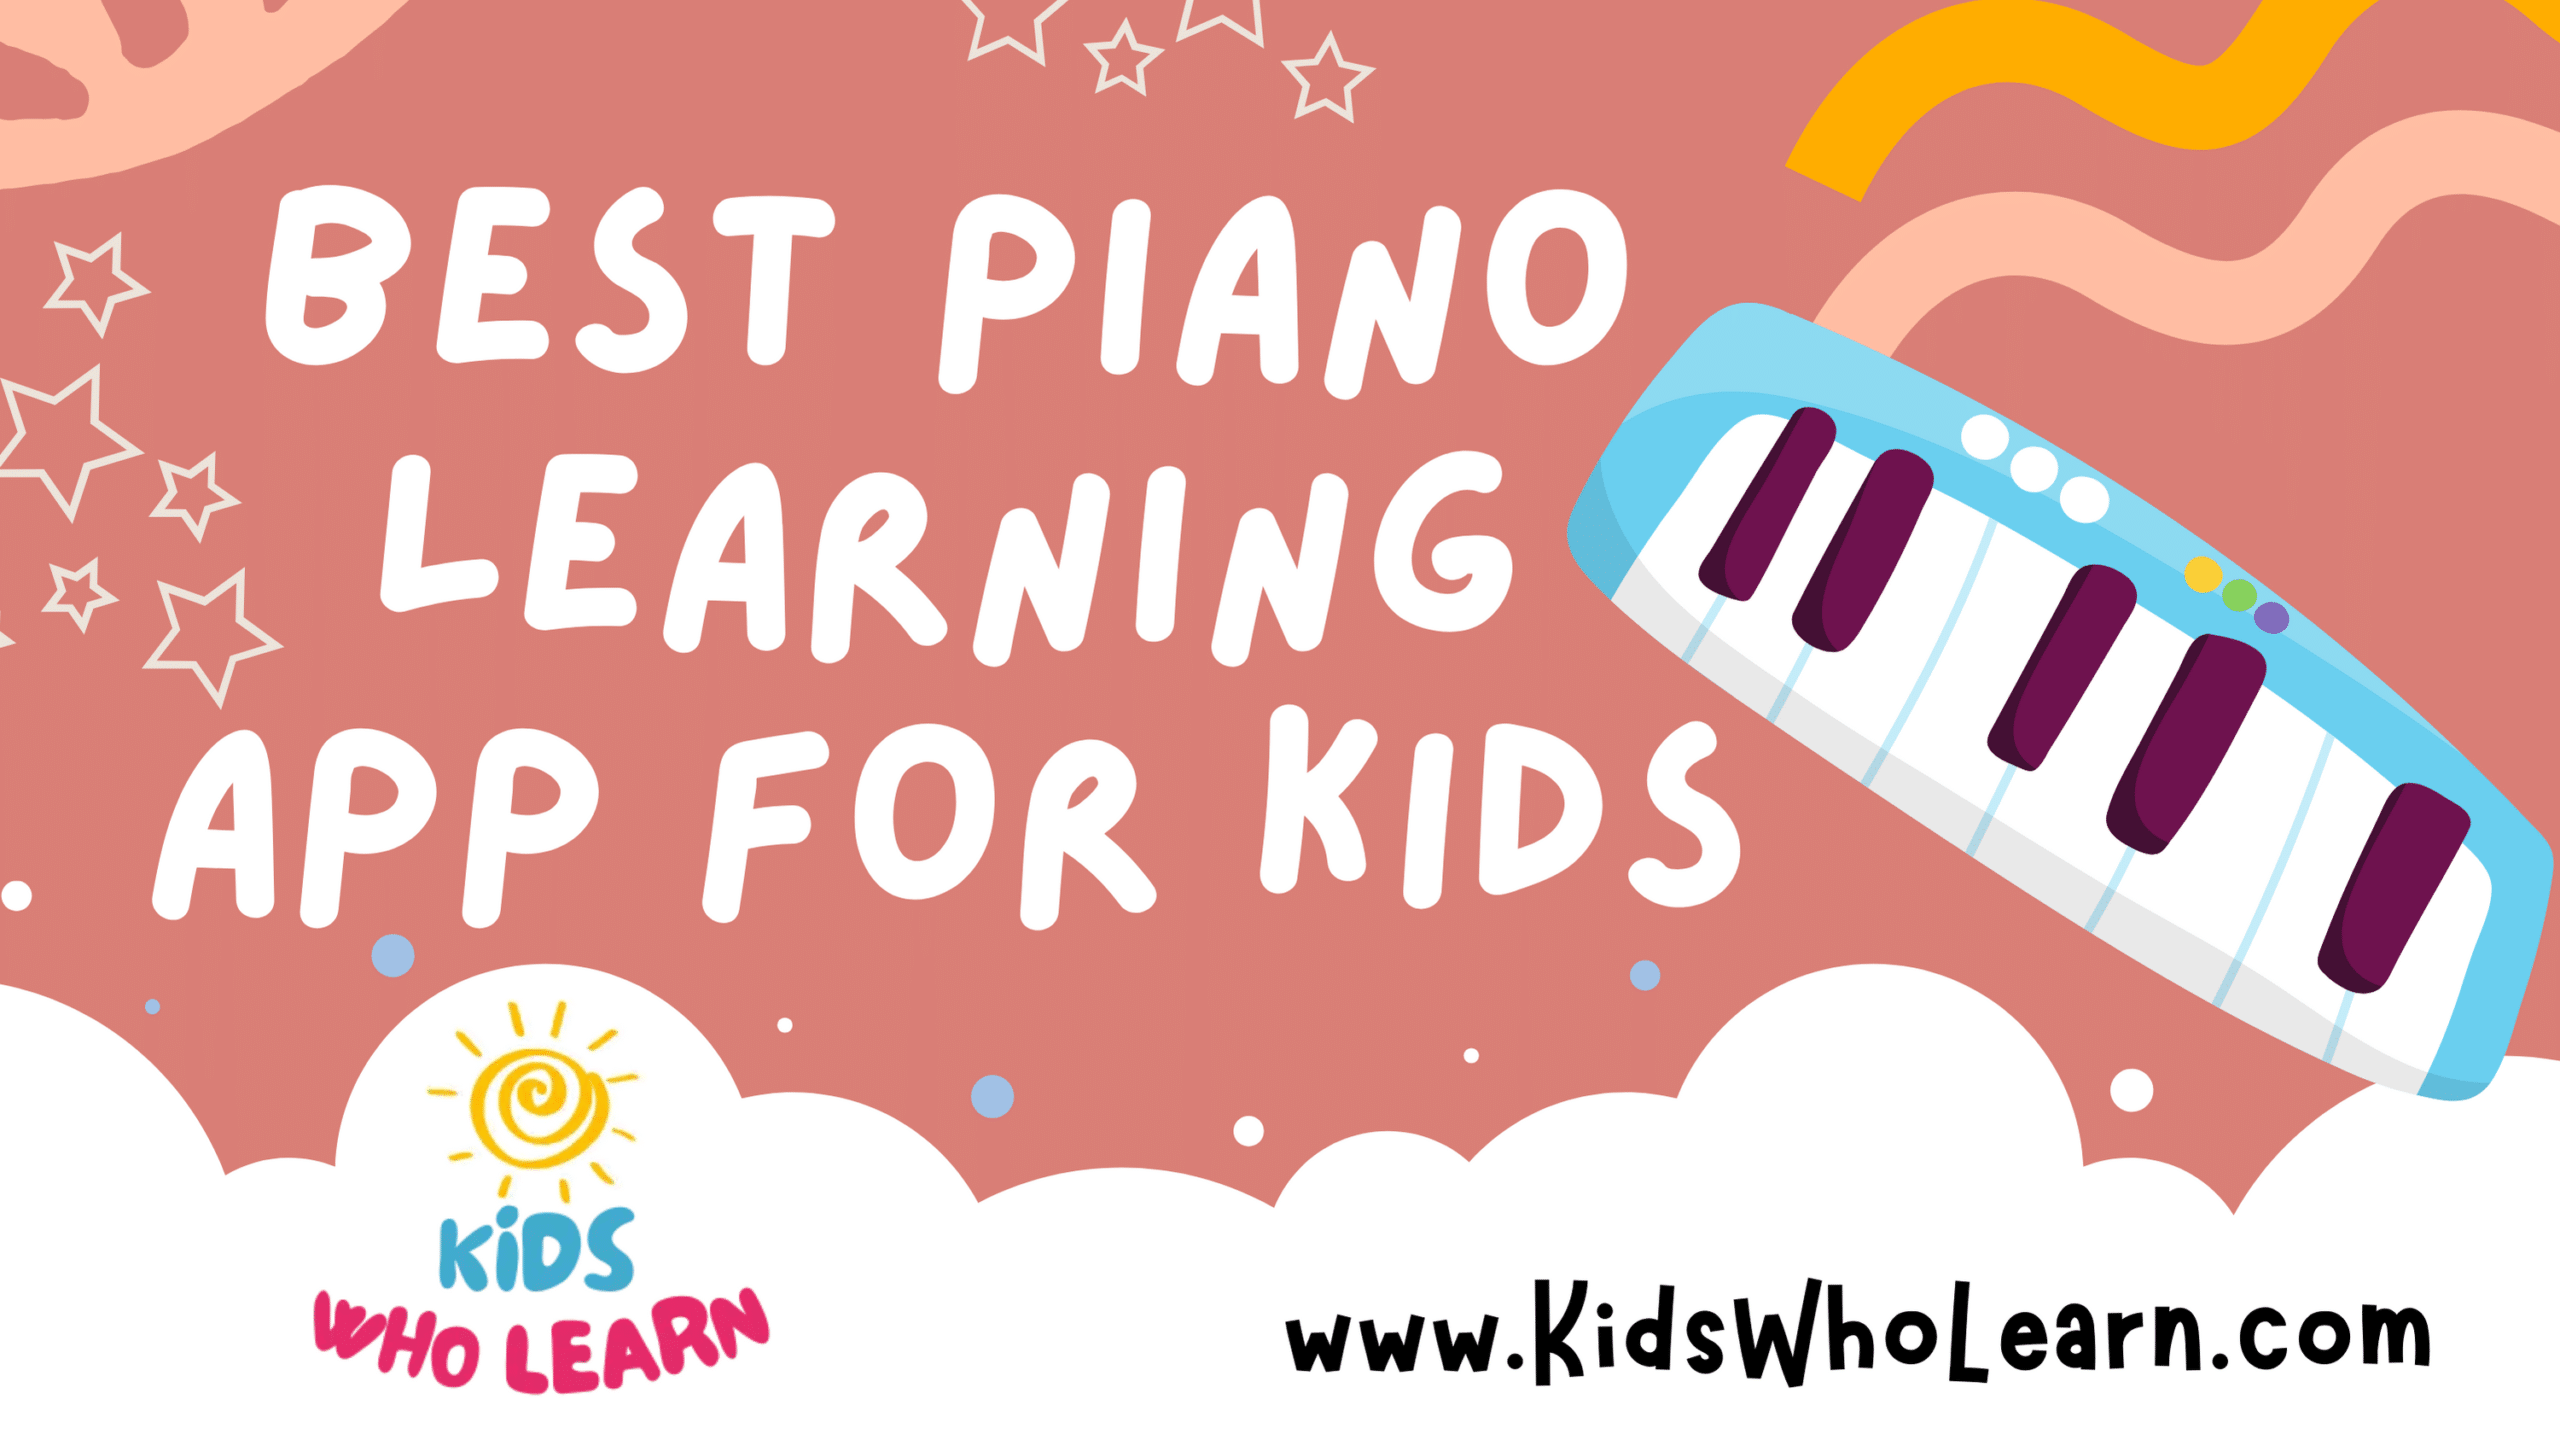 Best Piano Learning App For Kids